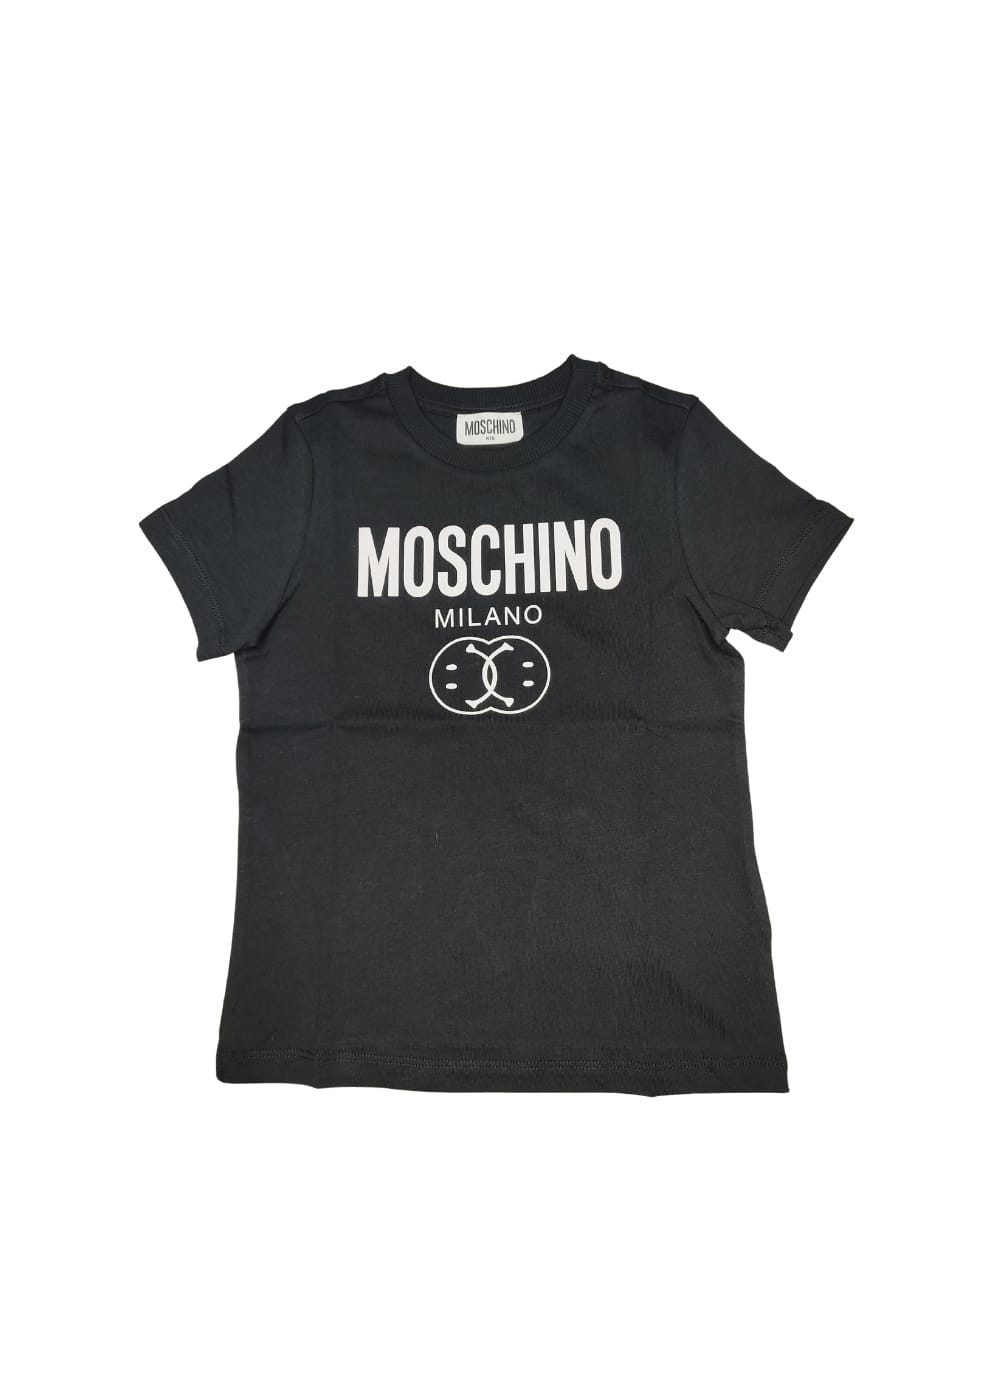 Featured image for “Moschino T-shirt Smile”